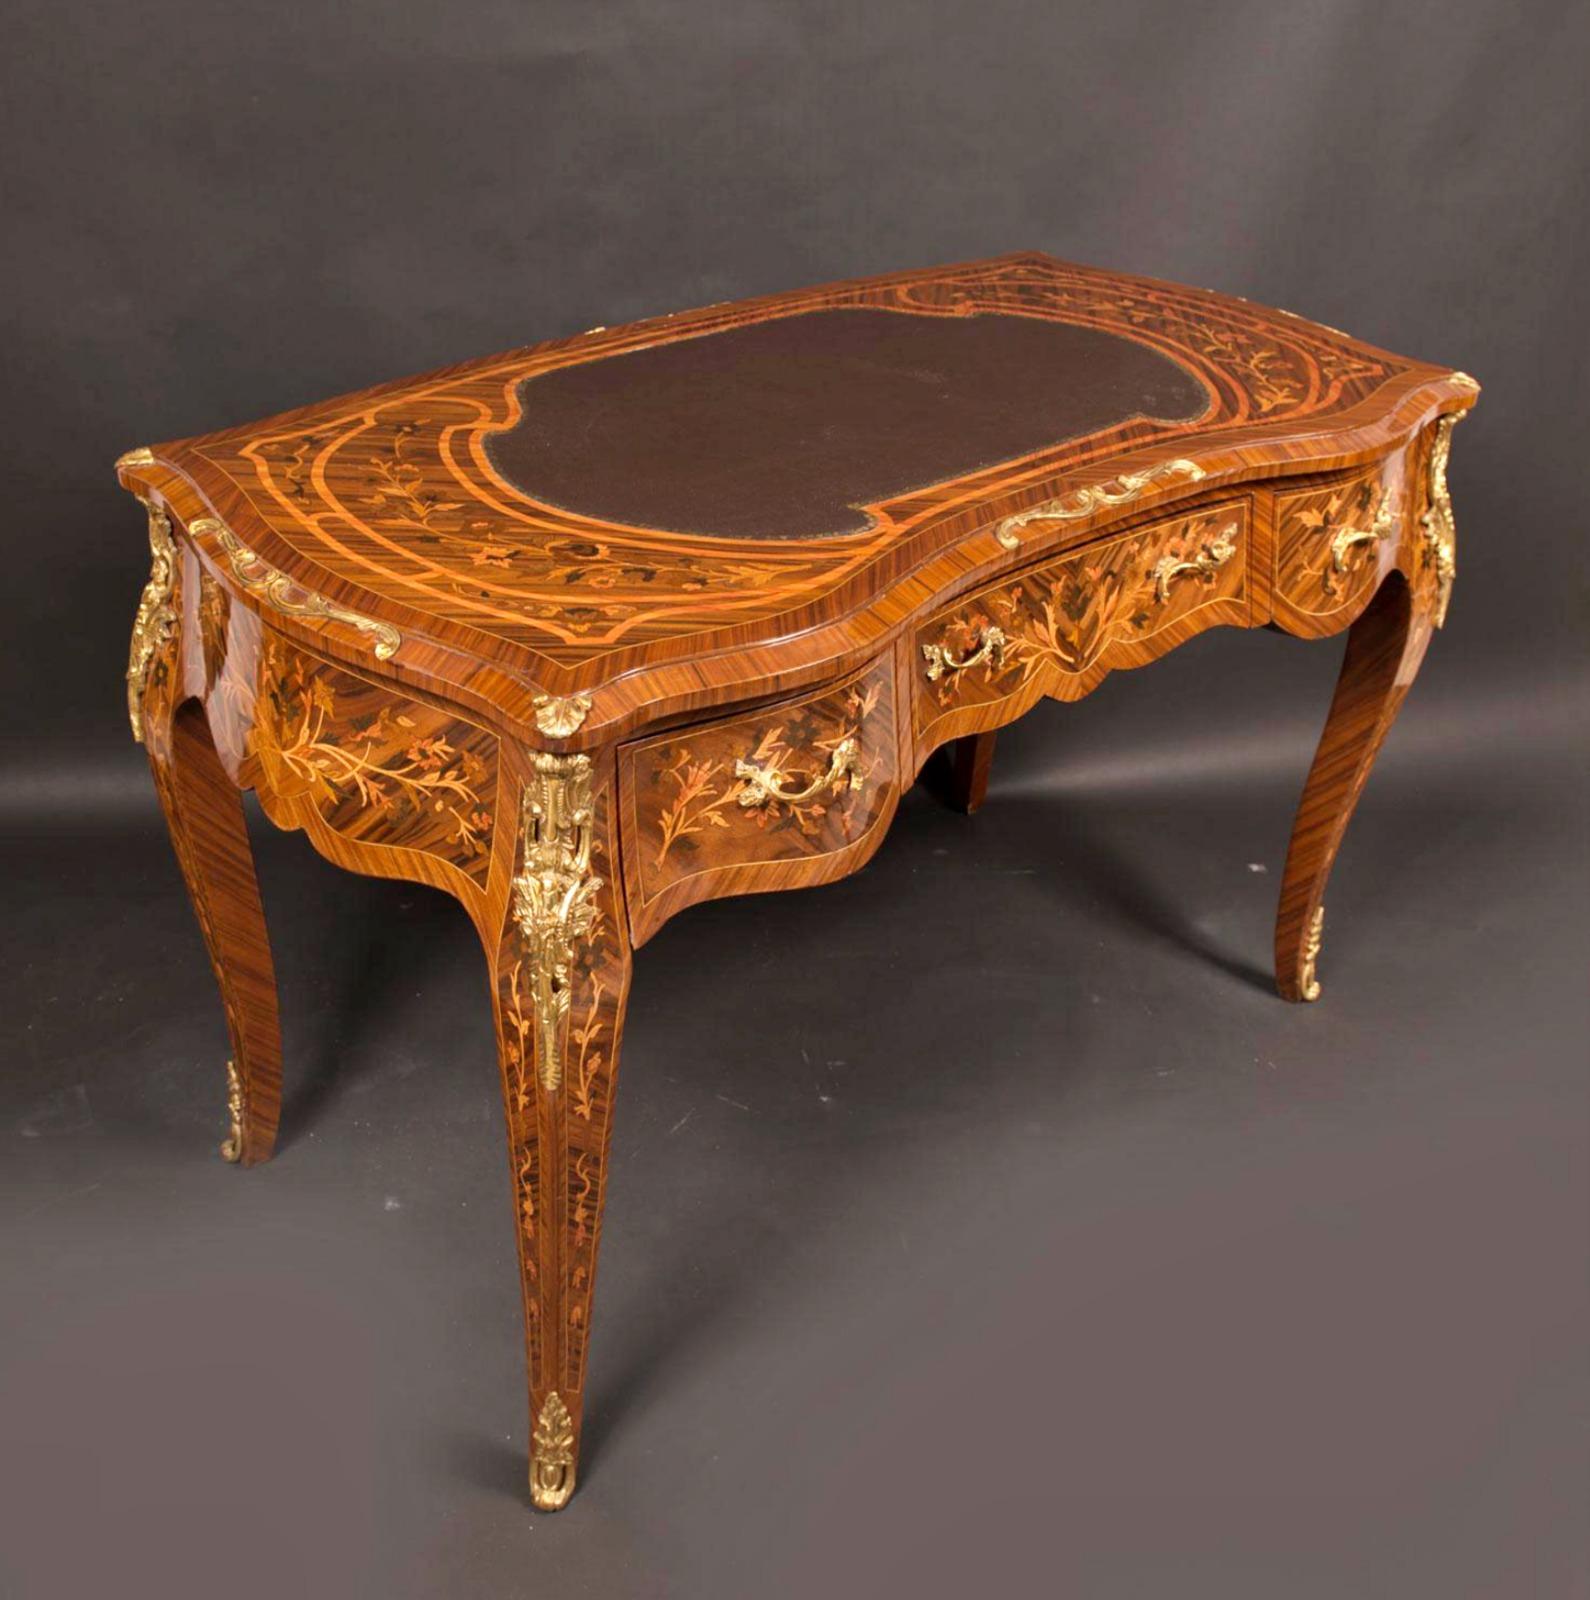 Beautiful French Bureau 19th/20th Century

with three drawers, four curved legs, border and top on all sides, hard wood body with rose wood veneer and rich floral intarsias in different fruit woods, gilted bronze mounts, top with leather center,